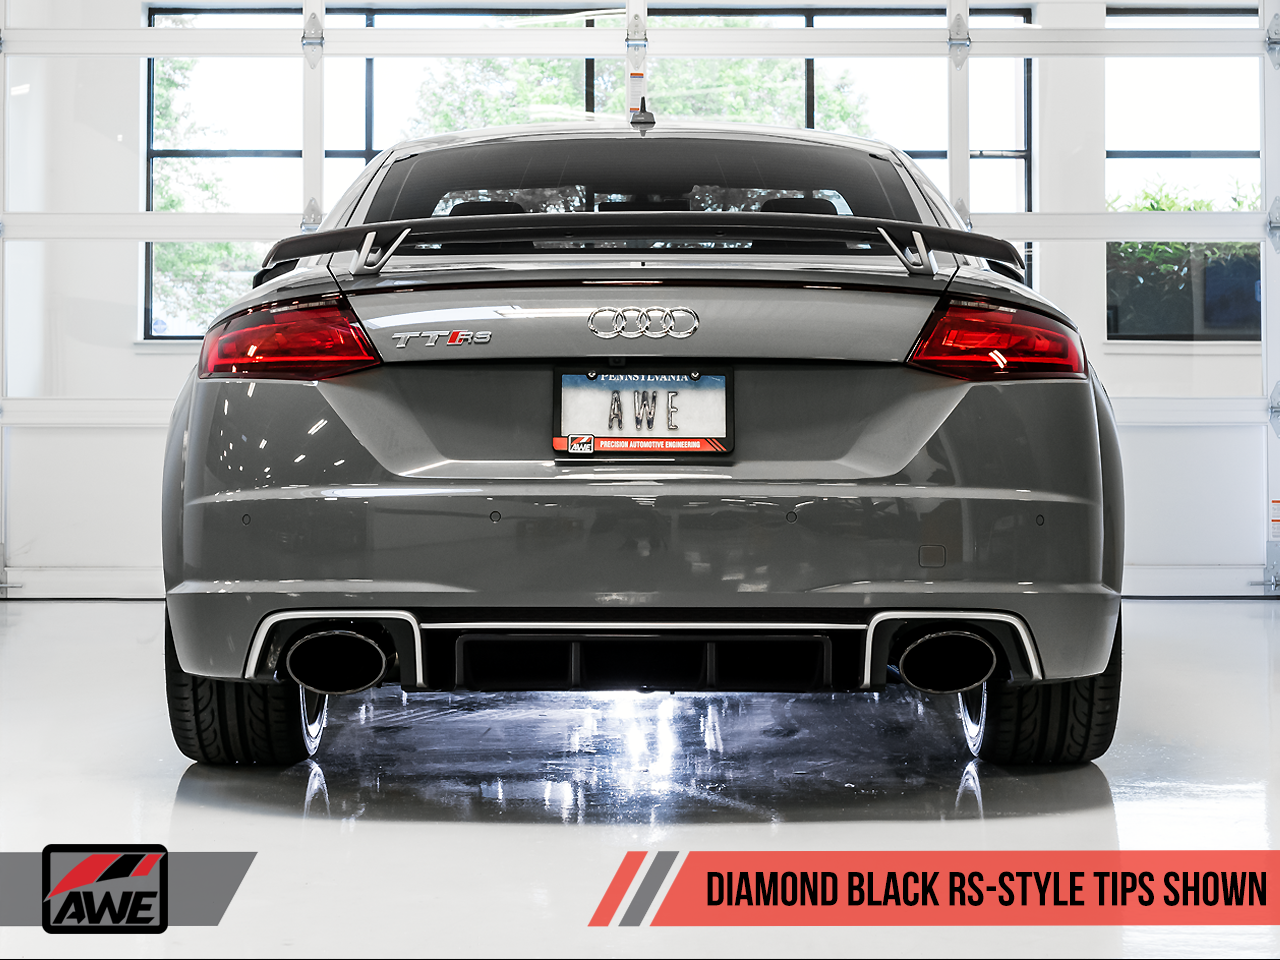 AWE Track Edition Exhaust for Audi MK3 TT RS - Diamond Black RS-style Tips - Motorsports LA